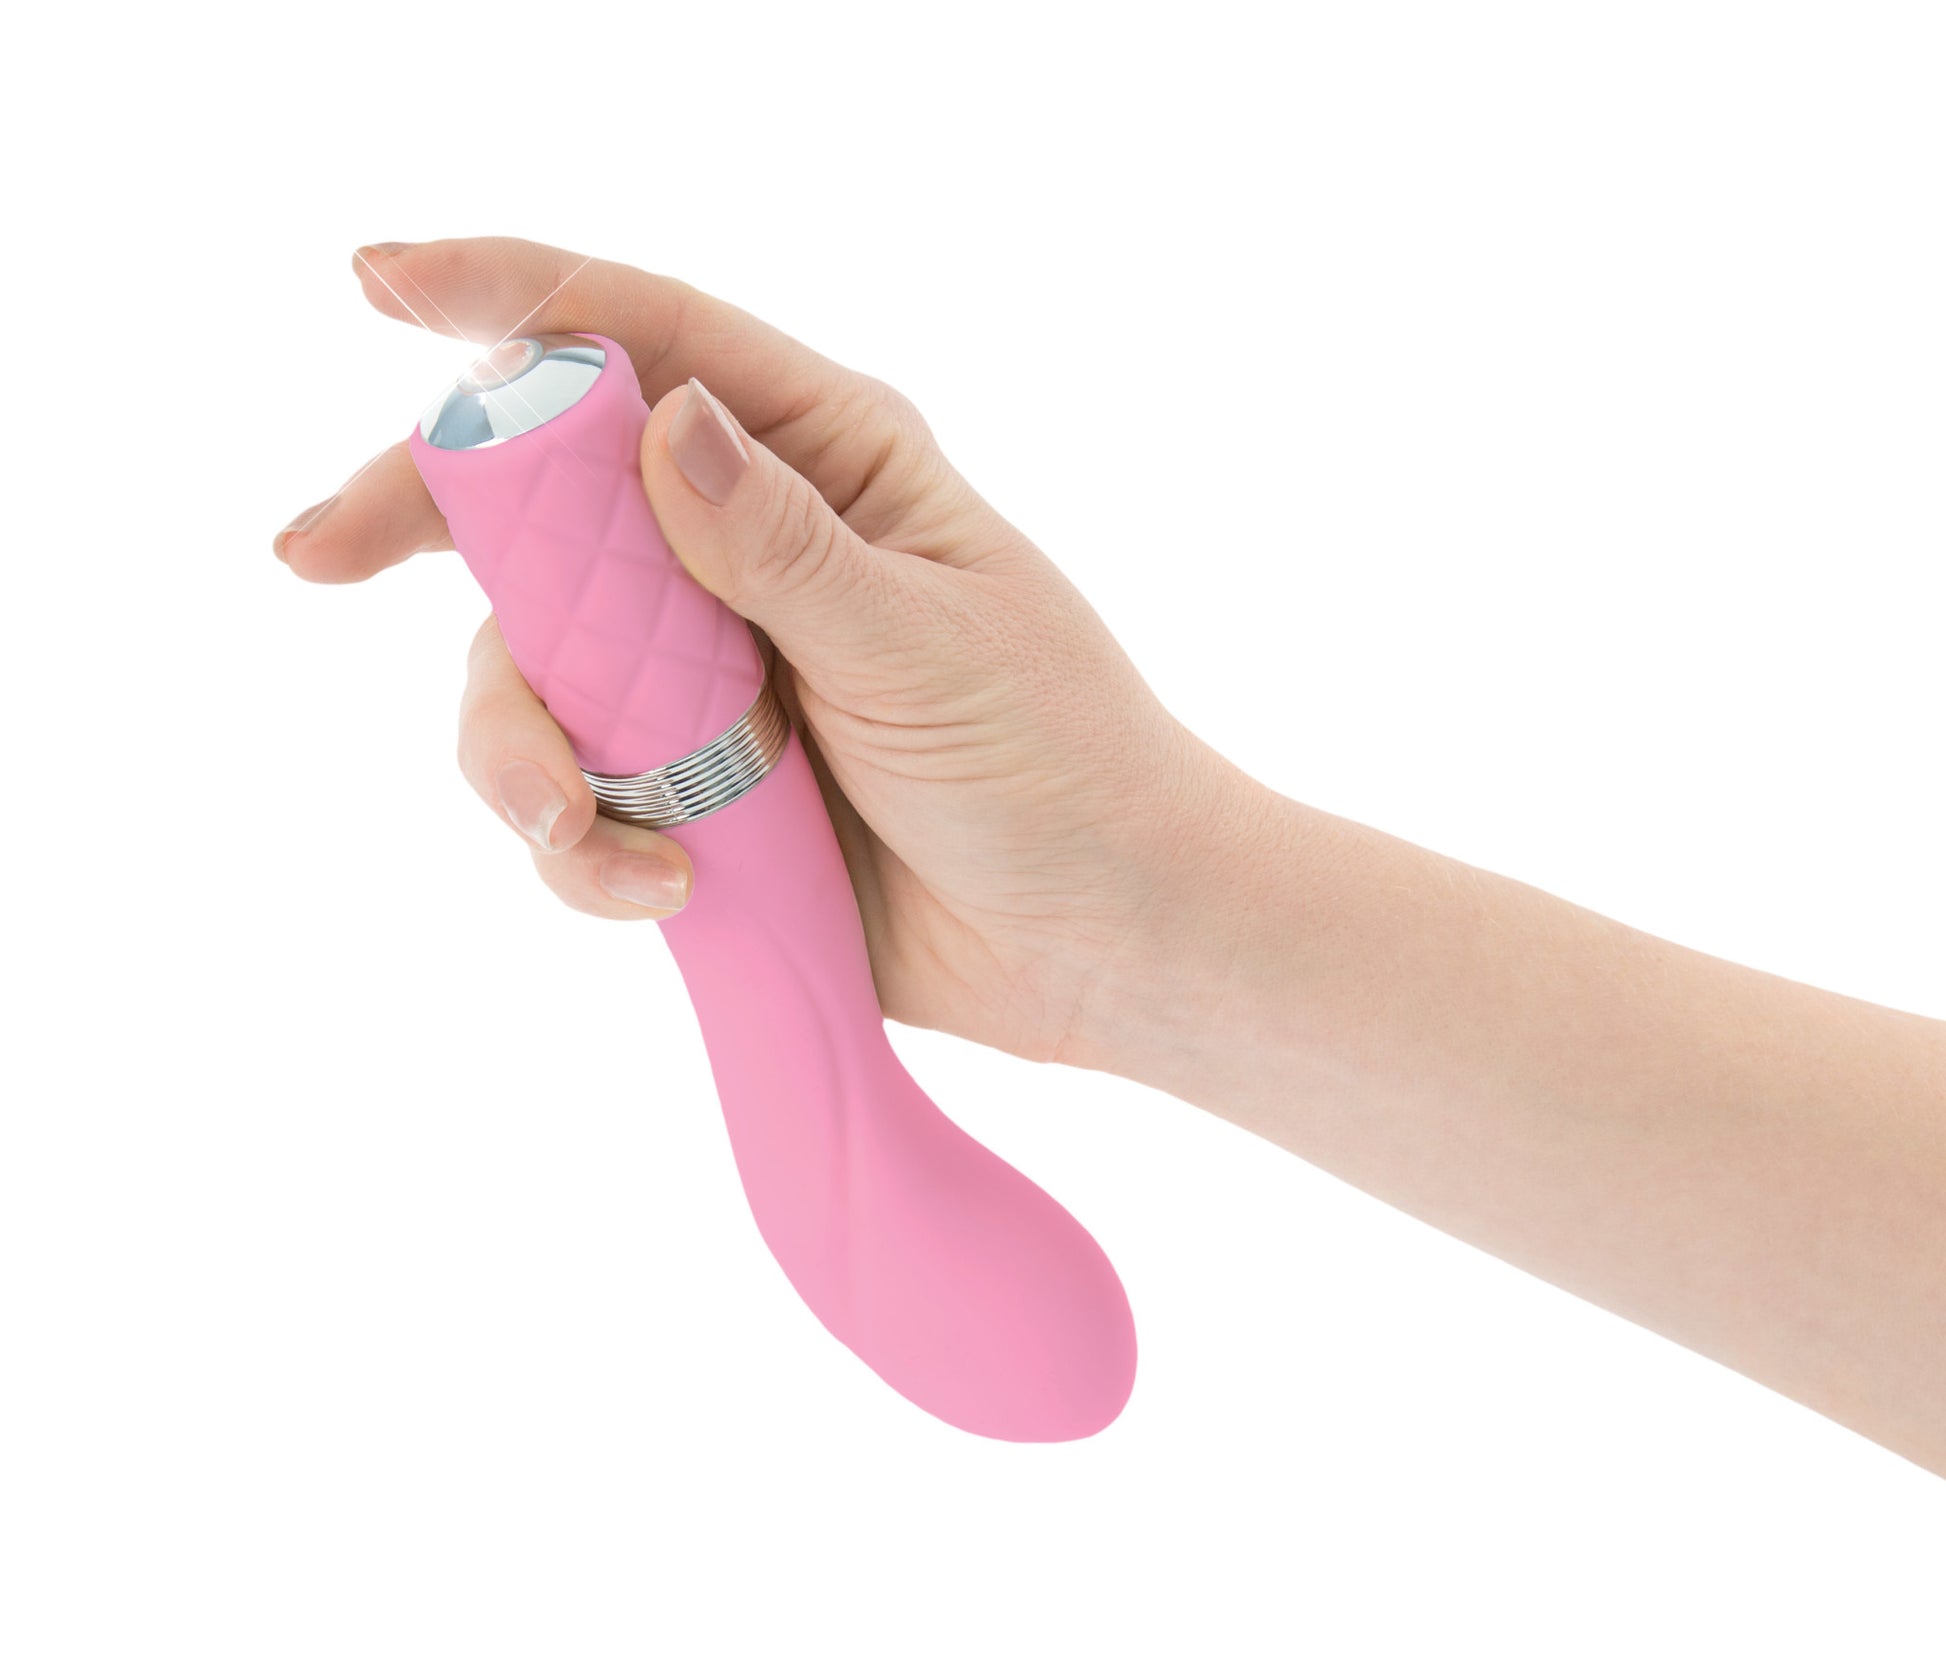 Photo shows a hand holding the vibrator and turning it on with the gemstone power button.